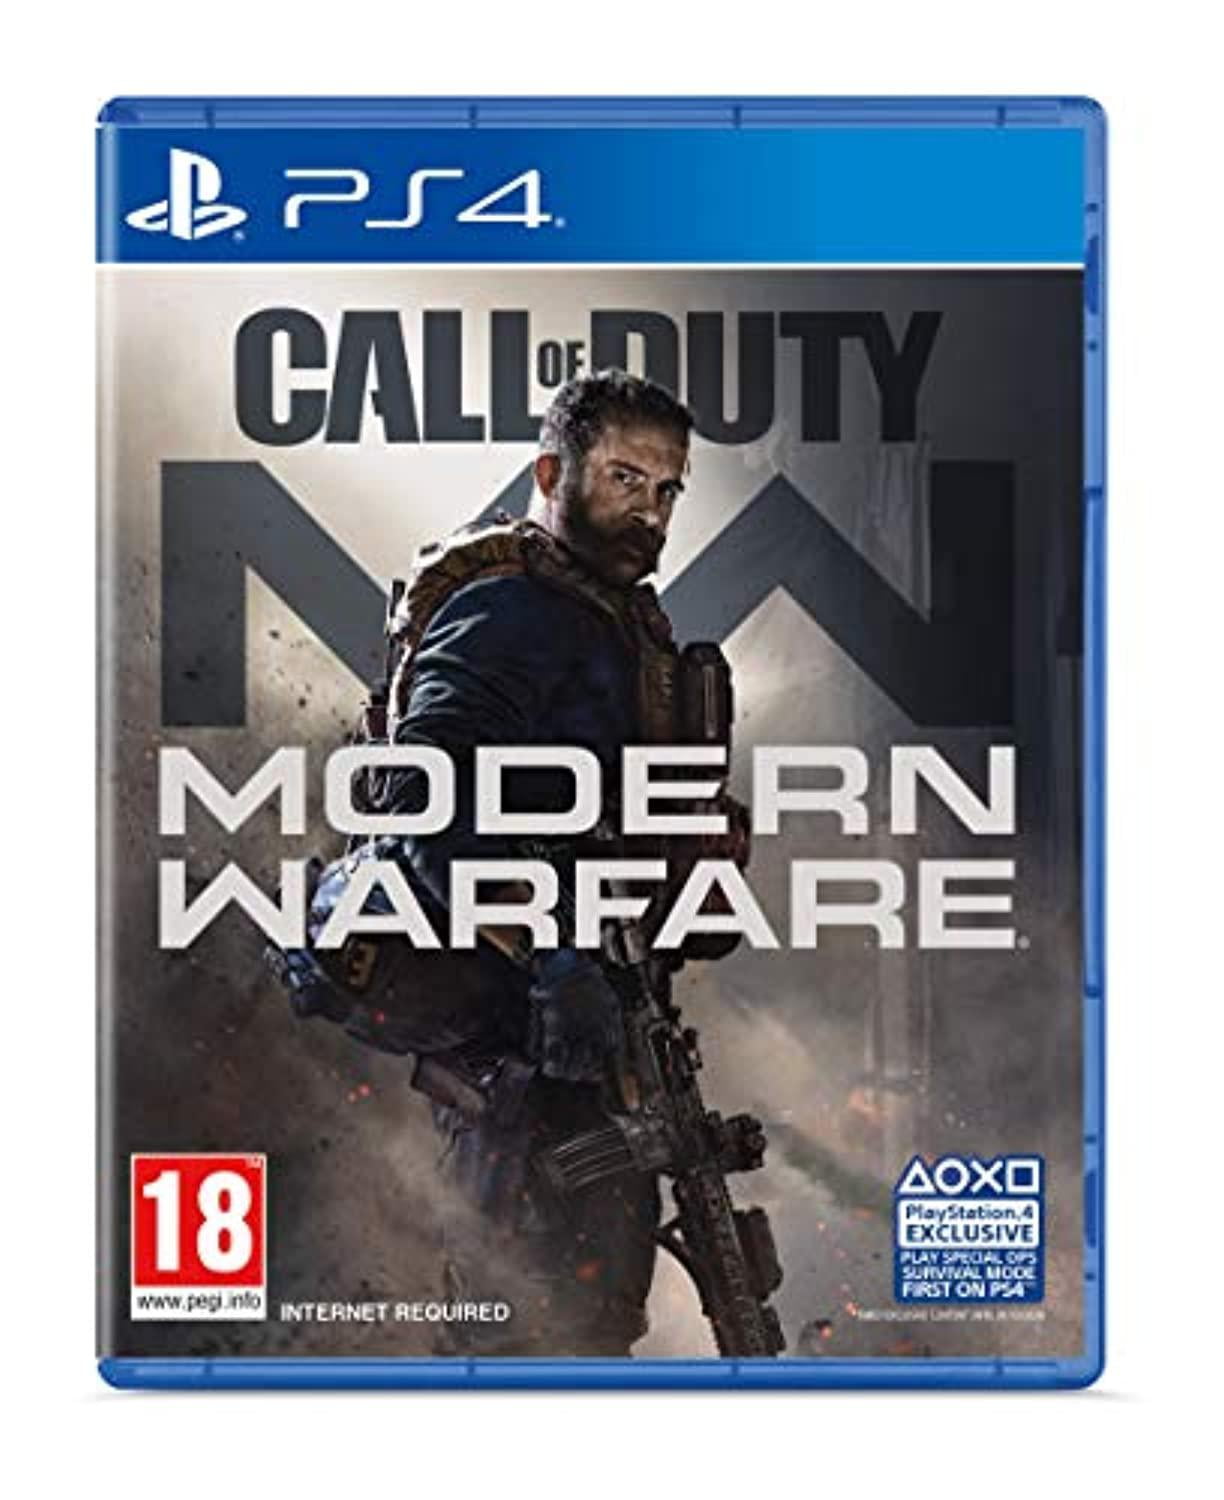 Call of Duty Modern Warfare COD (PS4 / Playstation 4) Campaign - Multiplayer - Special Ops